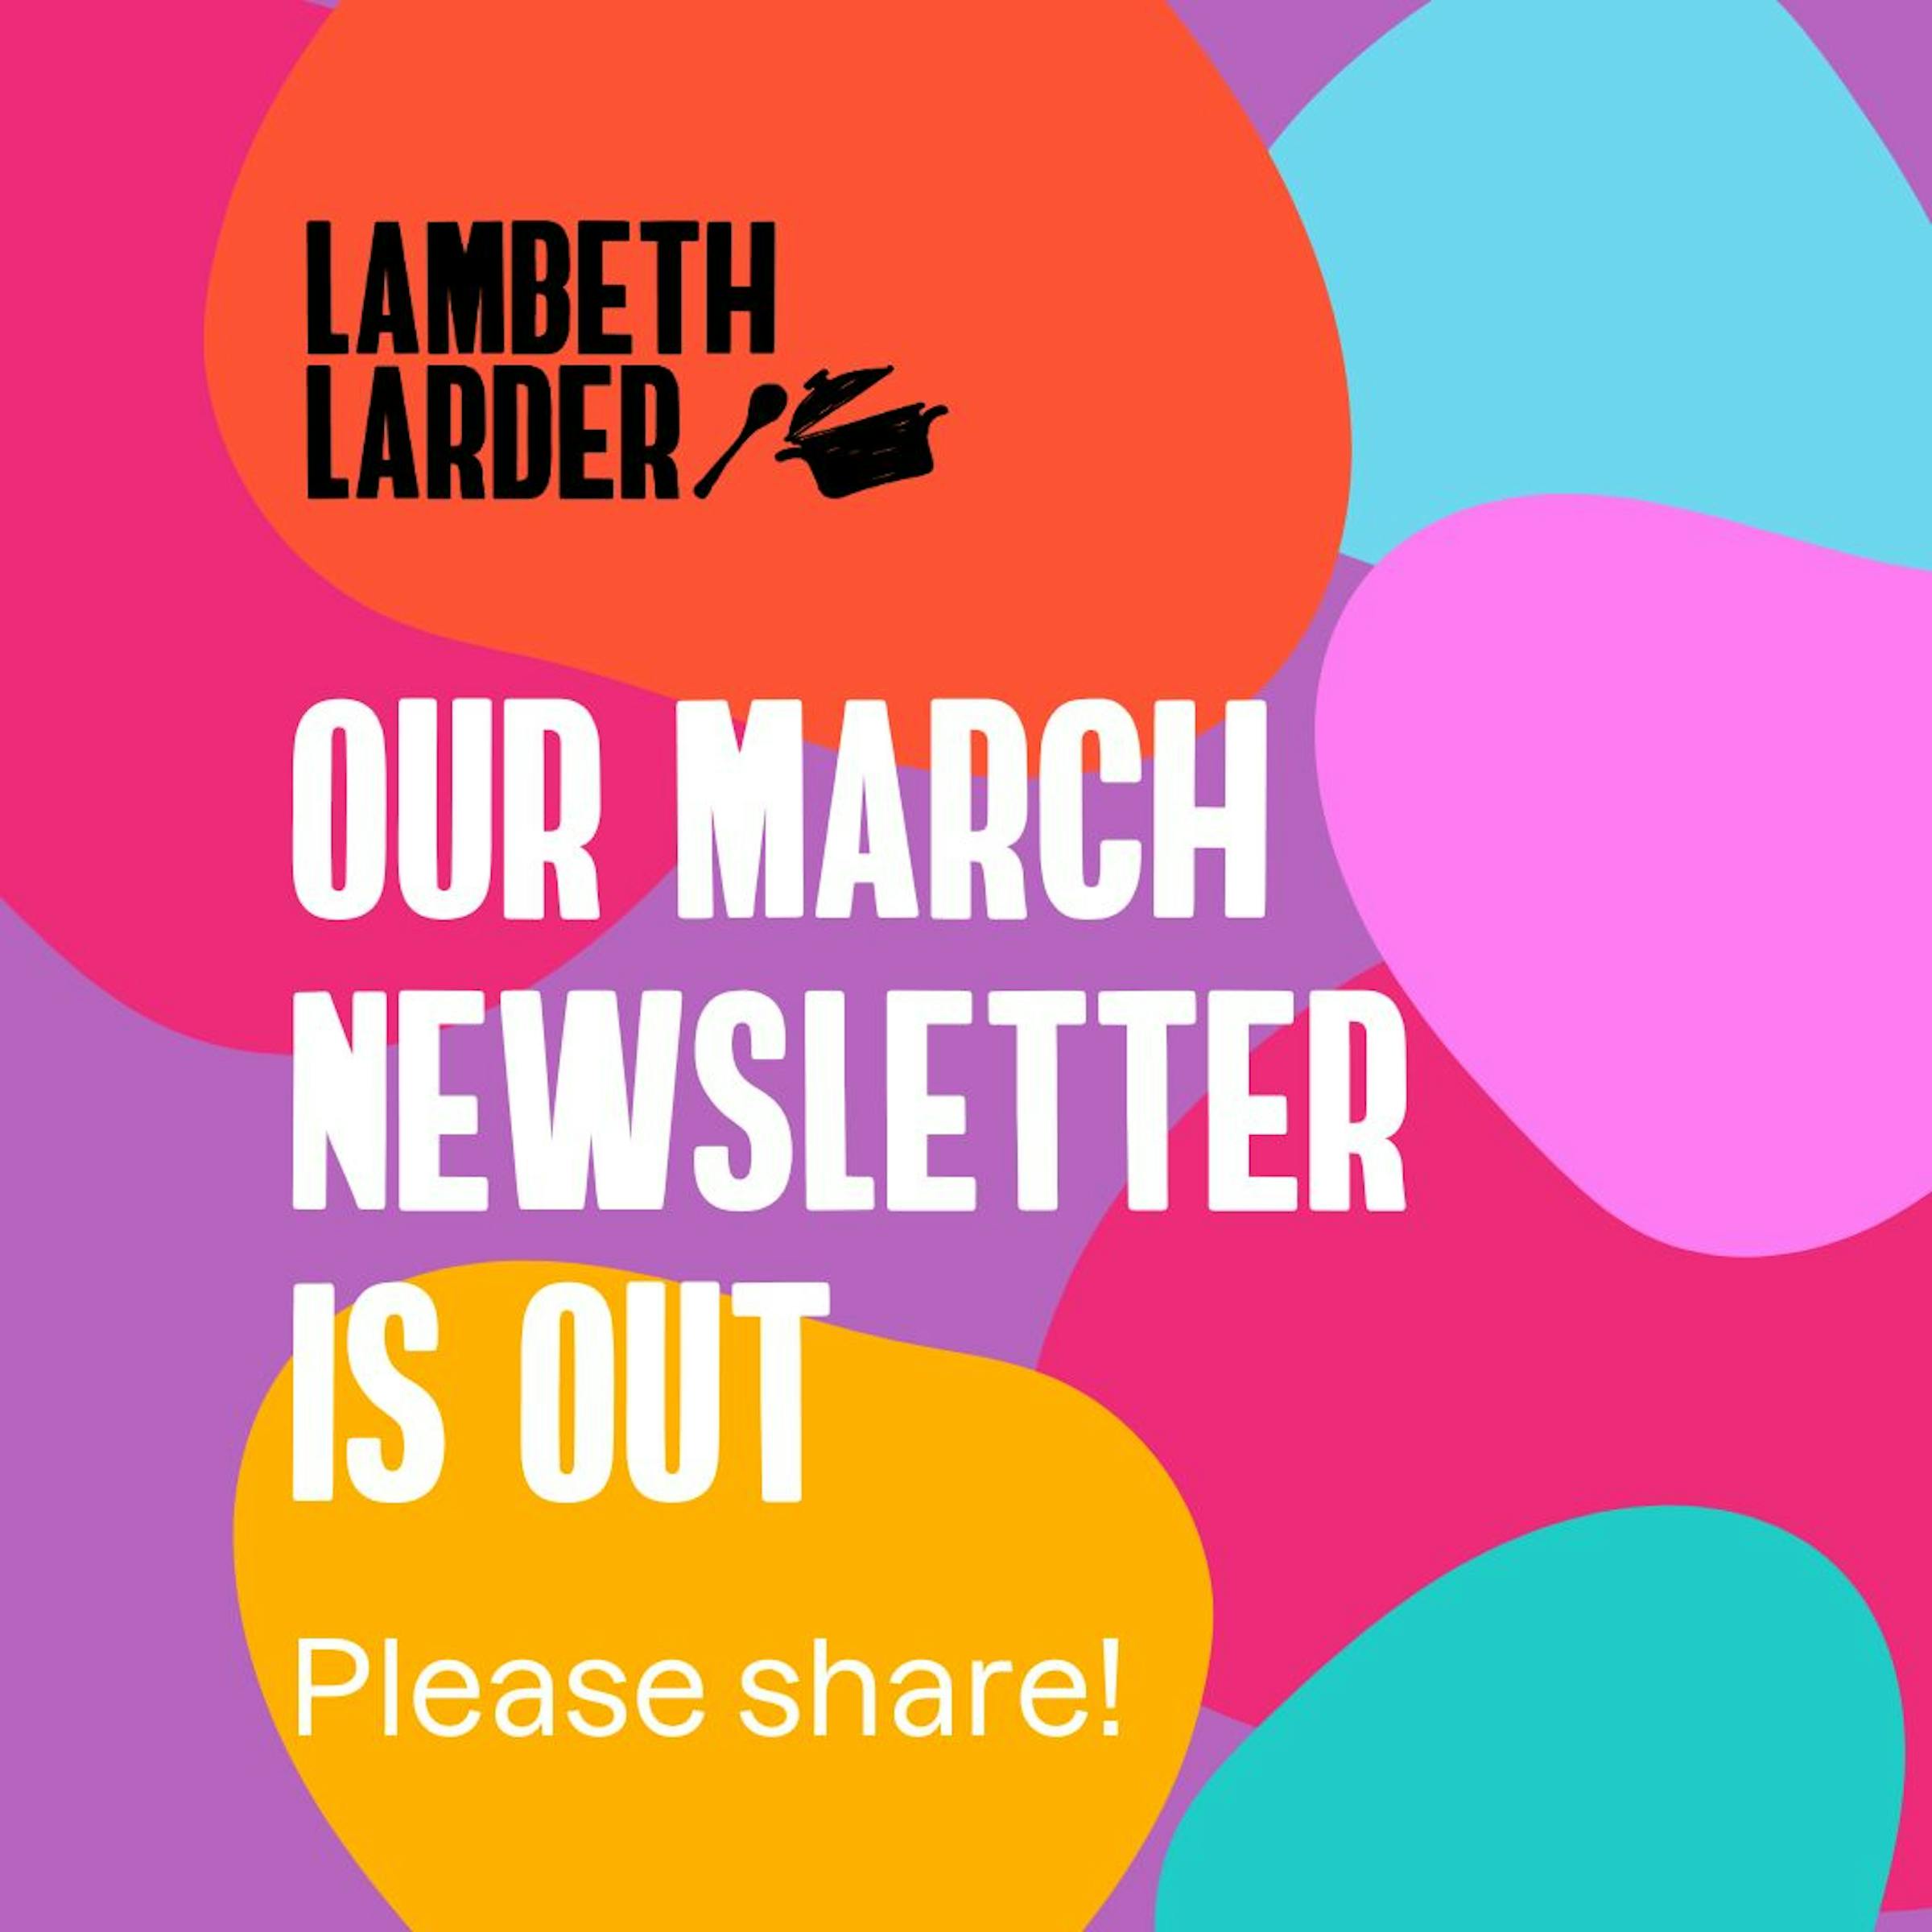 March newsletter out now!